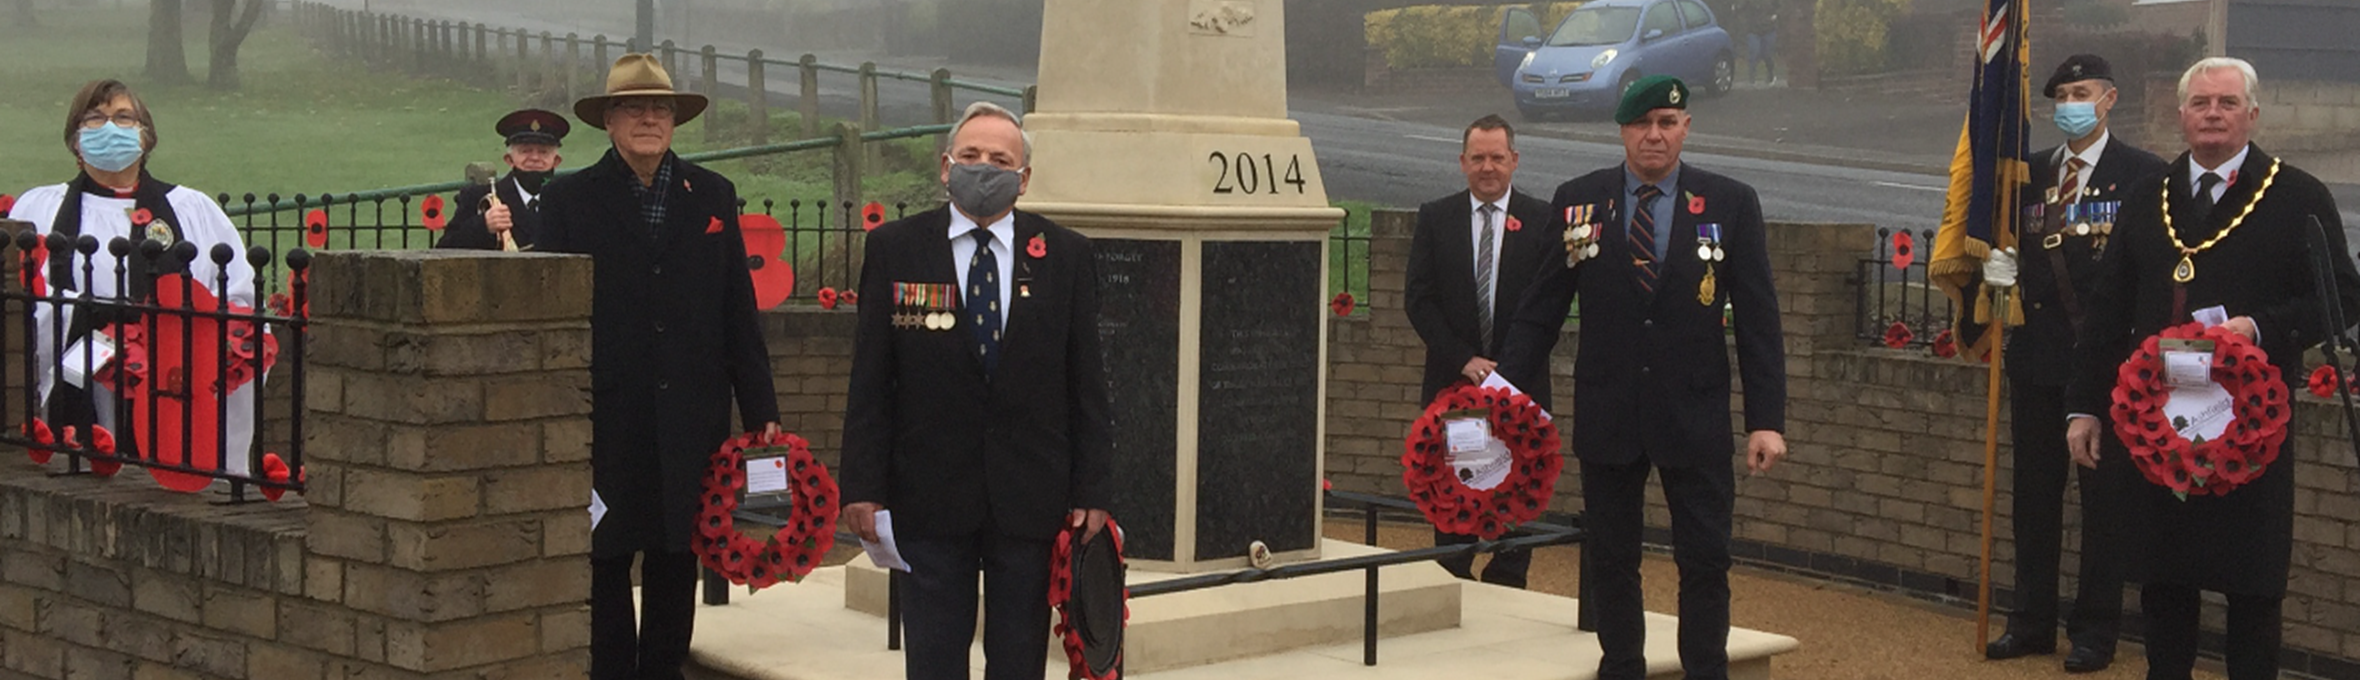 Remembrance Service 2020 at Selston War Memorial